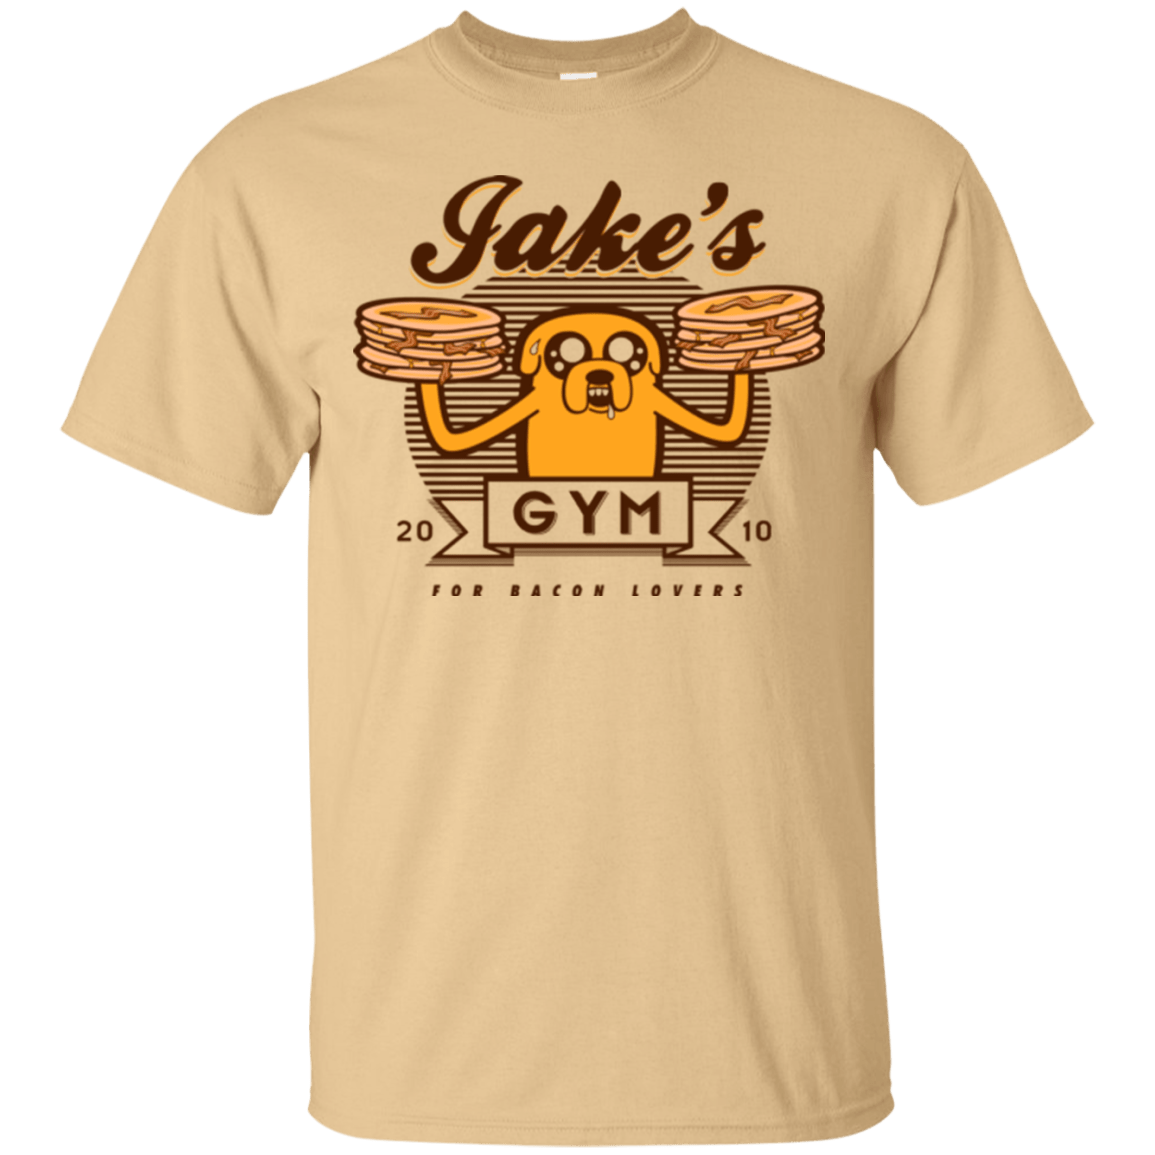 T-Shirts Vegas Gold / Small Bacon lovers gym T-Shirt